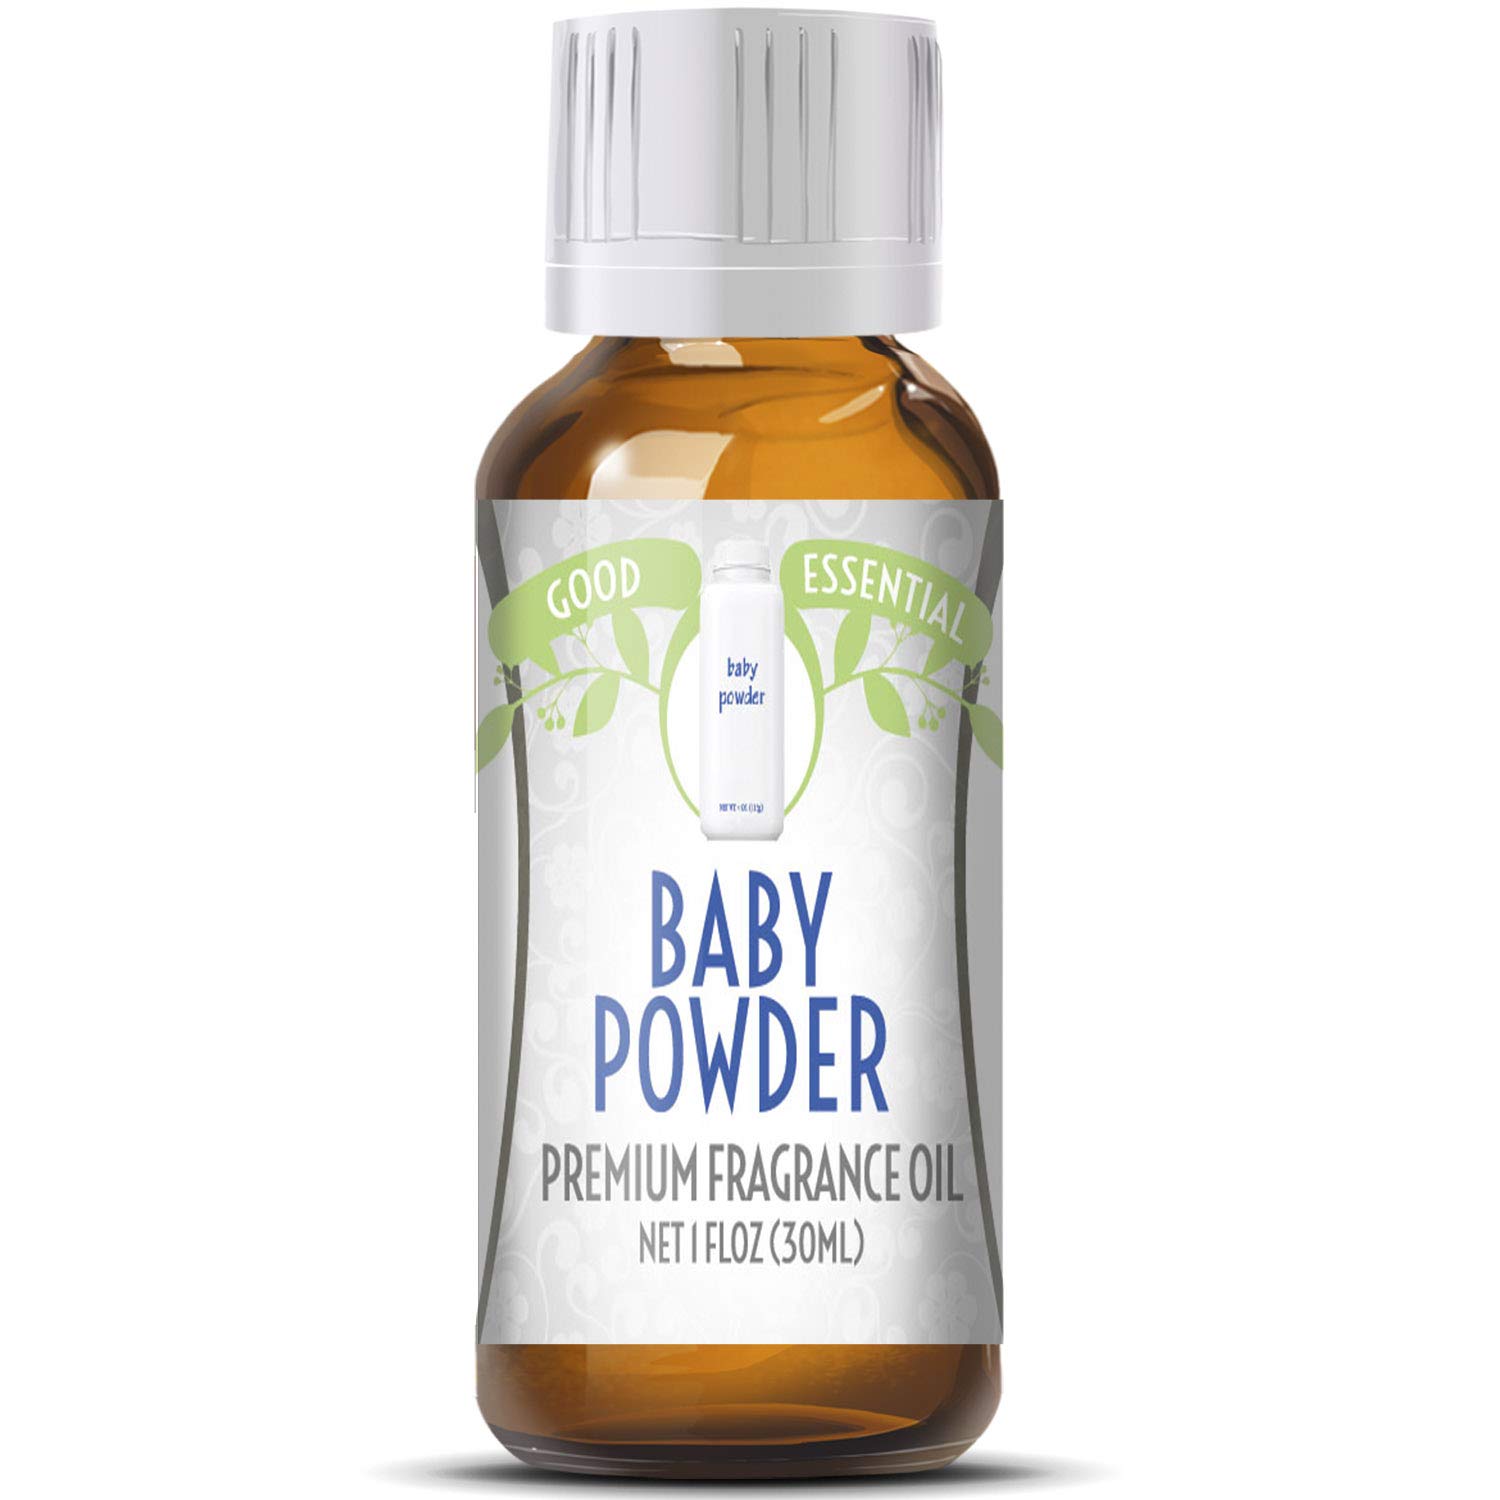 Baby Powder Scented Oil by Good Essential